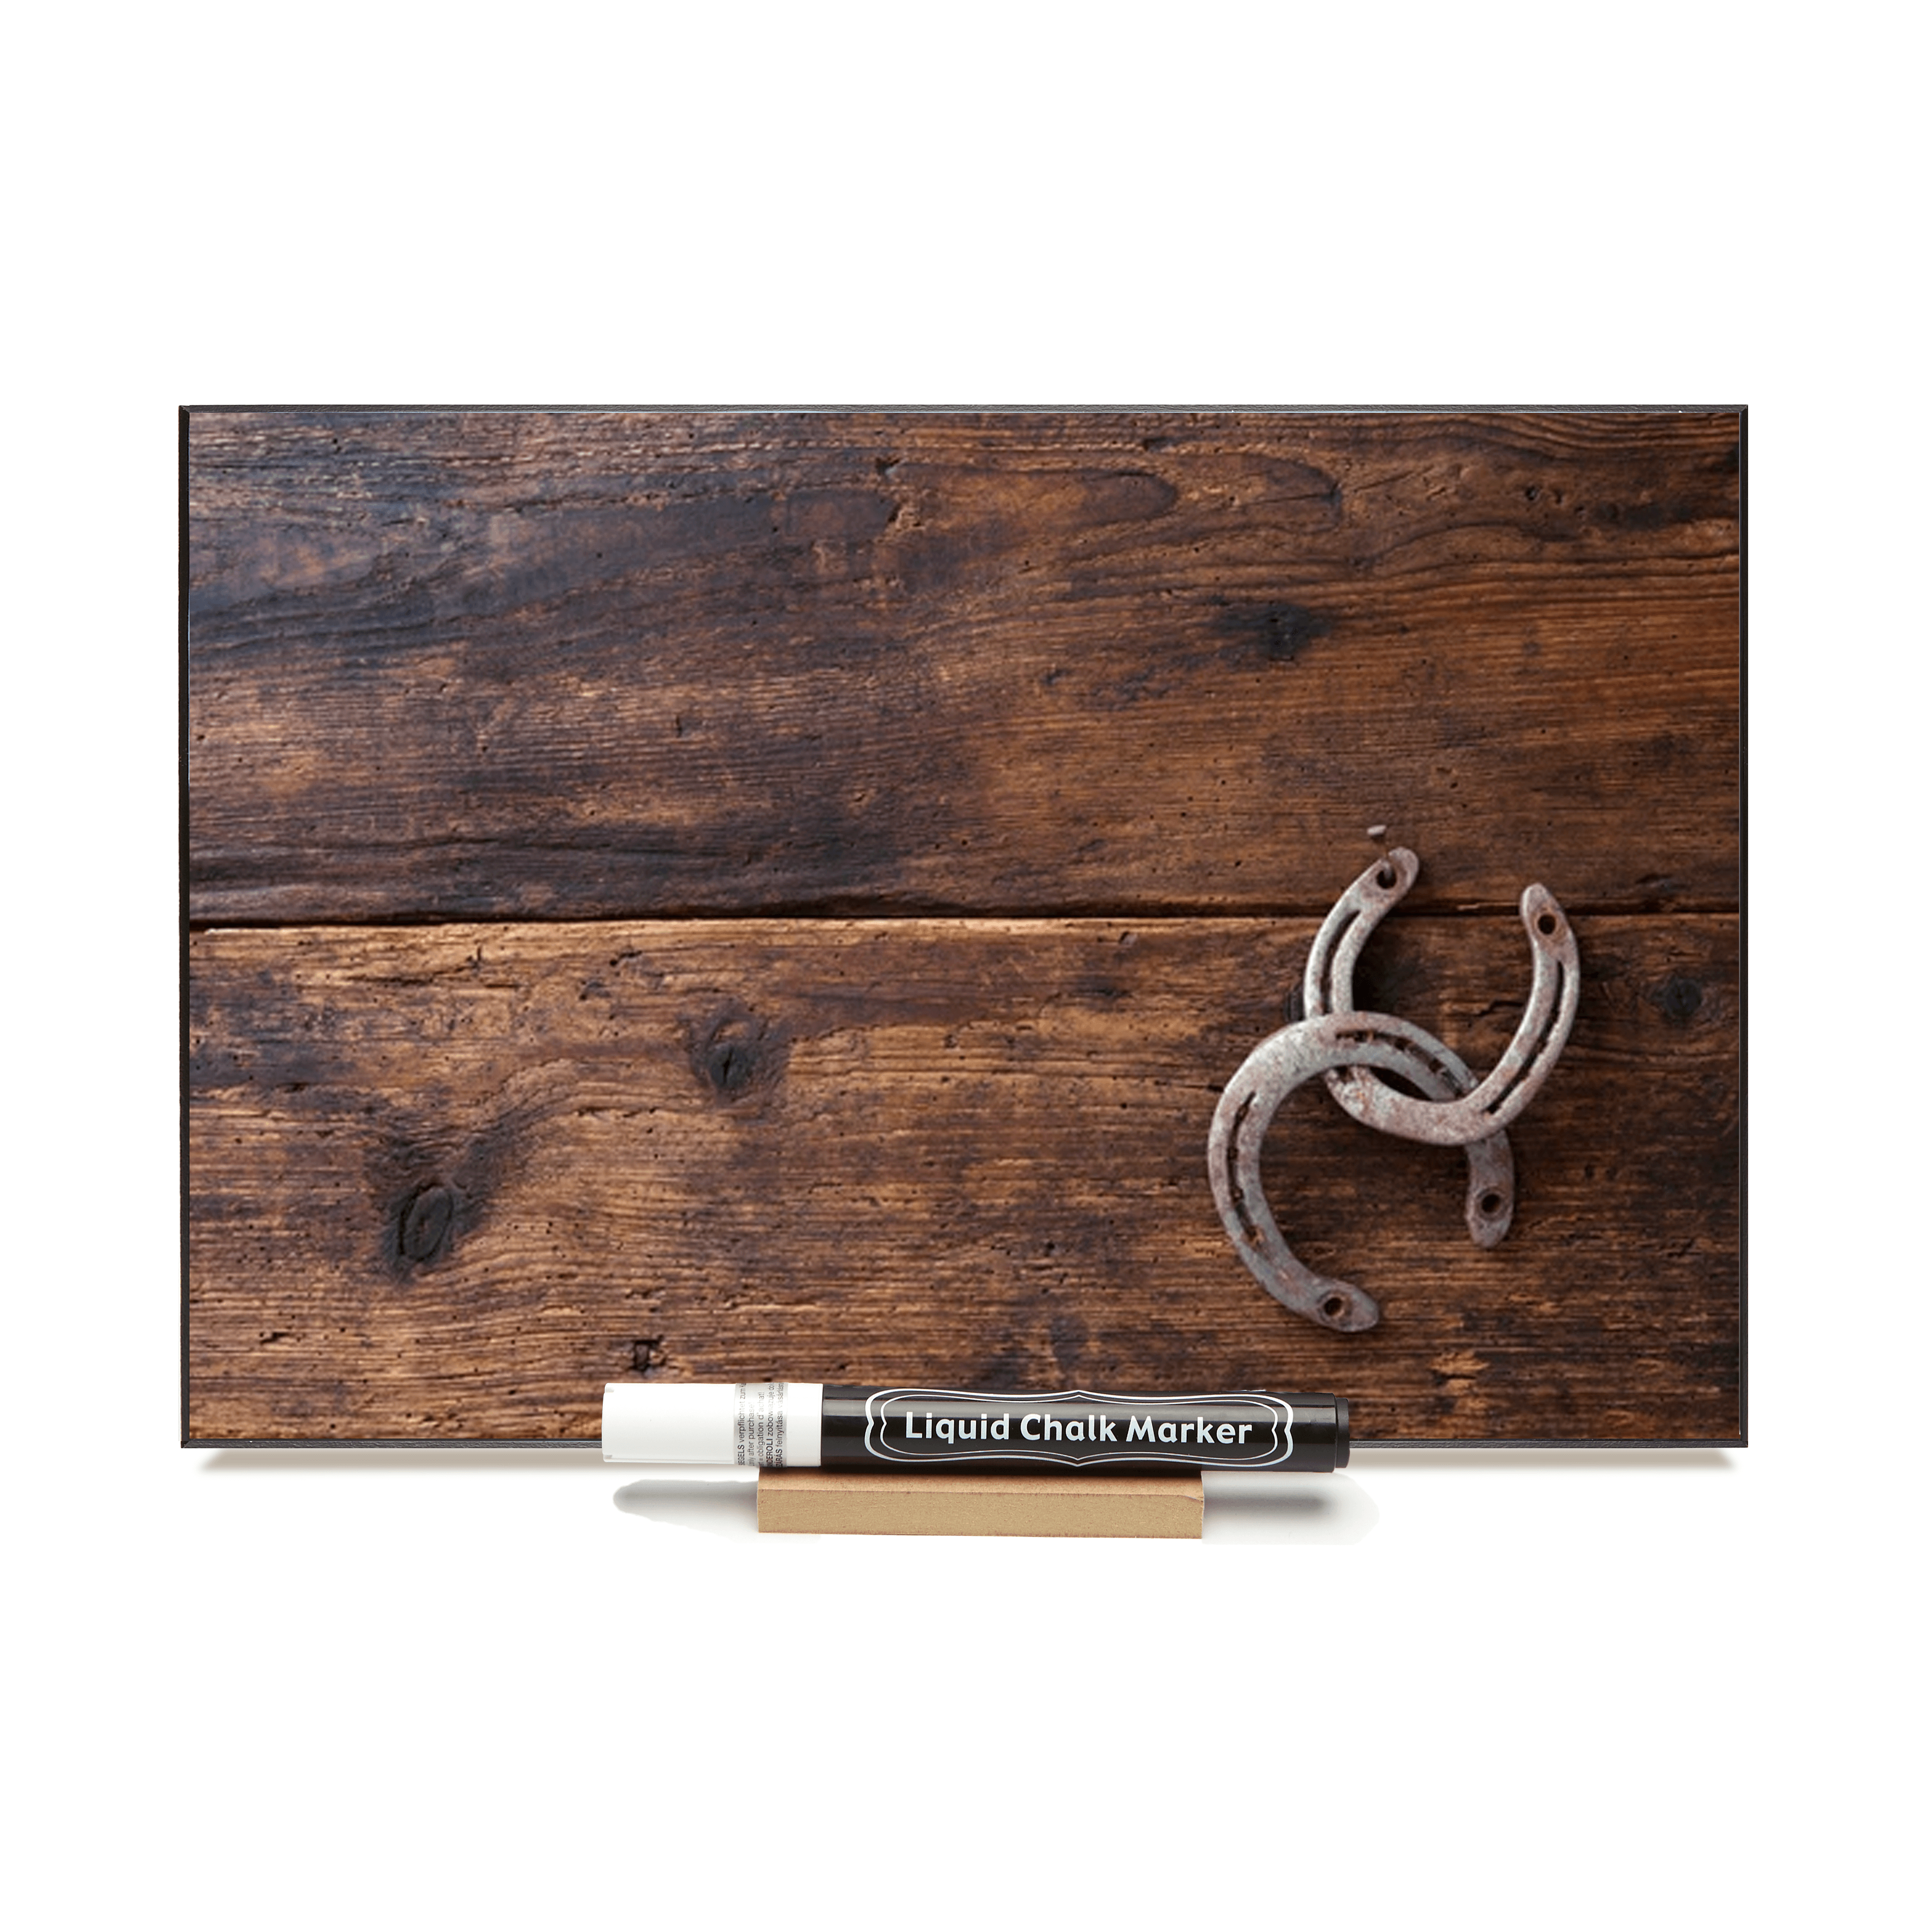 "Horseshoes"  PHOTO CHALKBOARDS  Includes Chalkboard, Chalk Marker & Stand